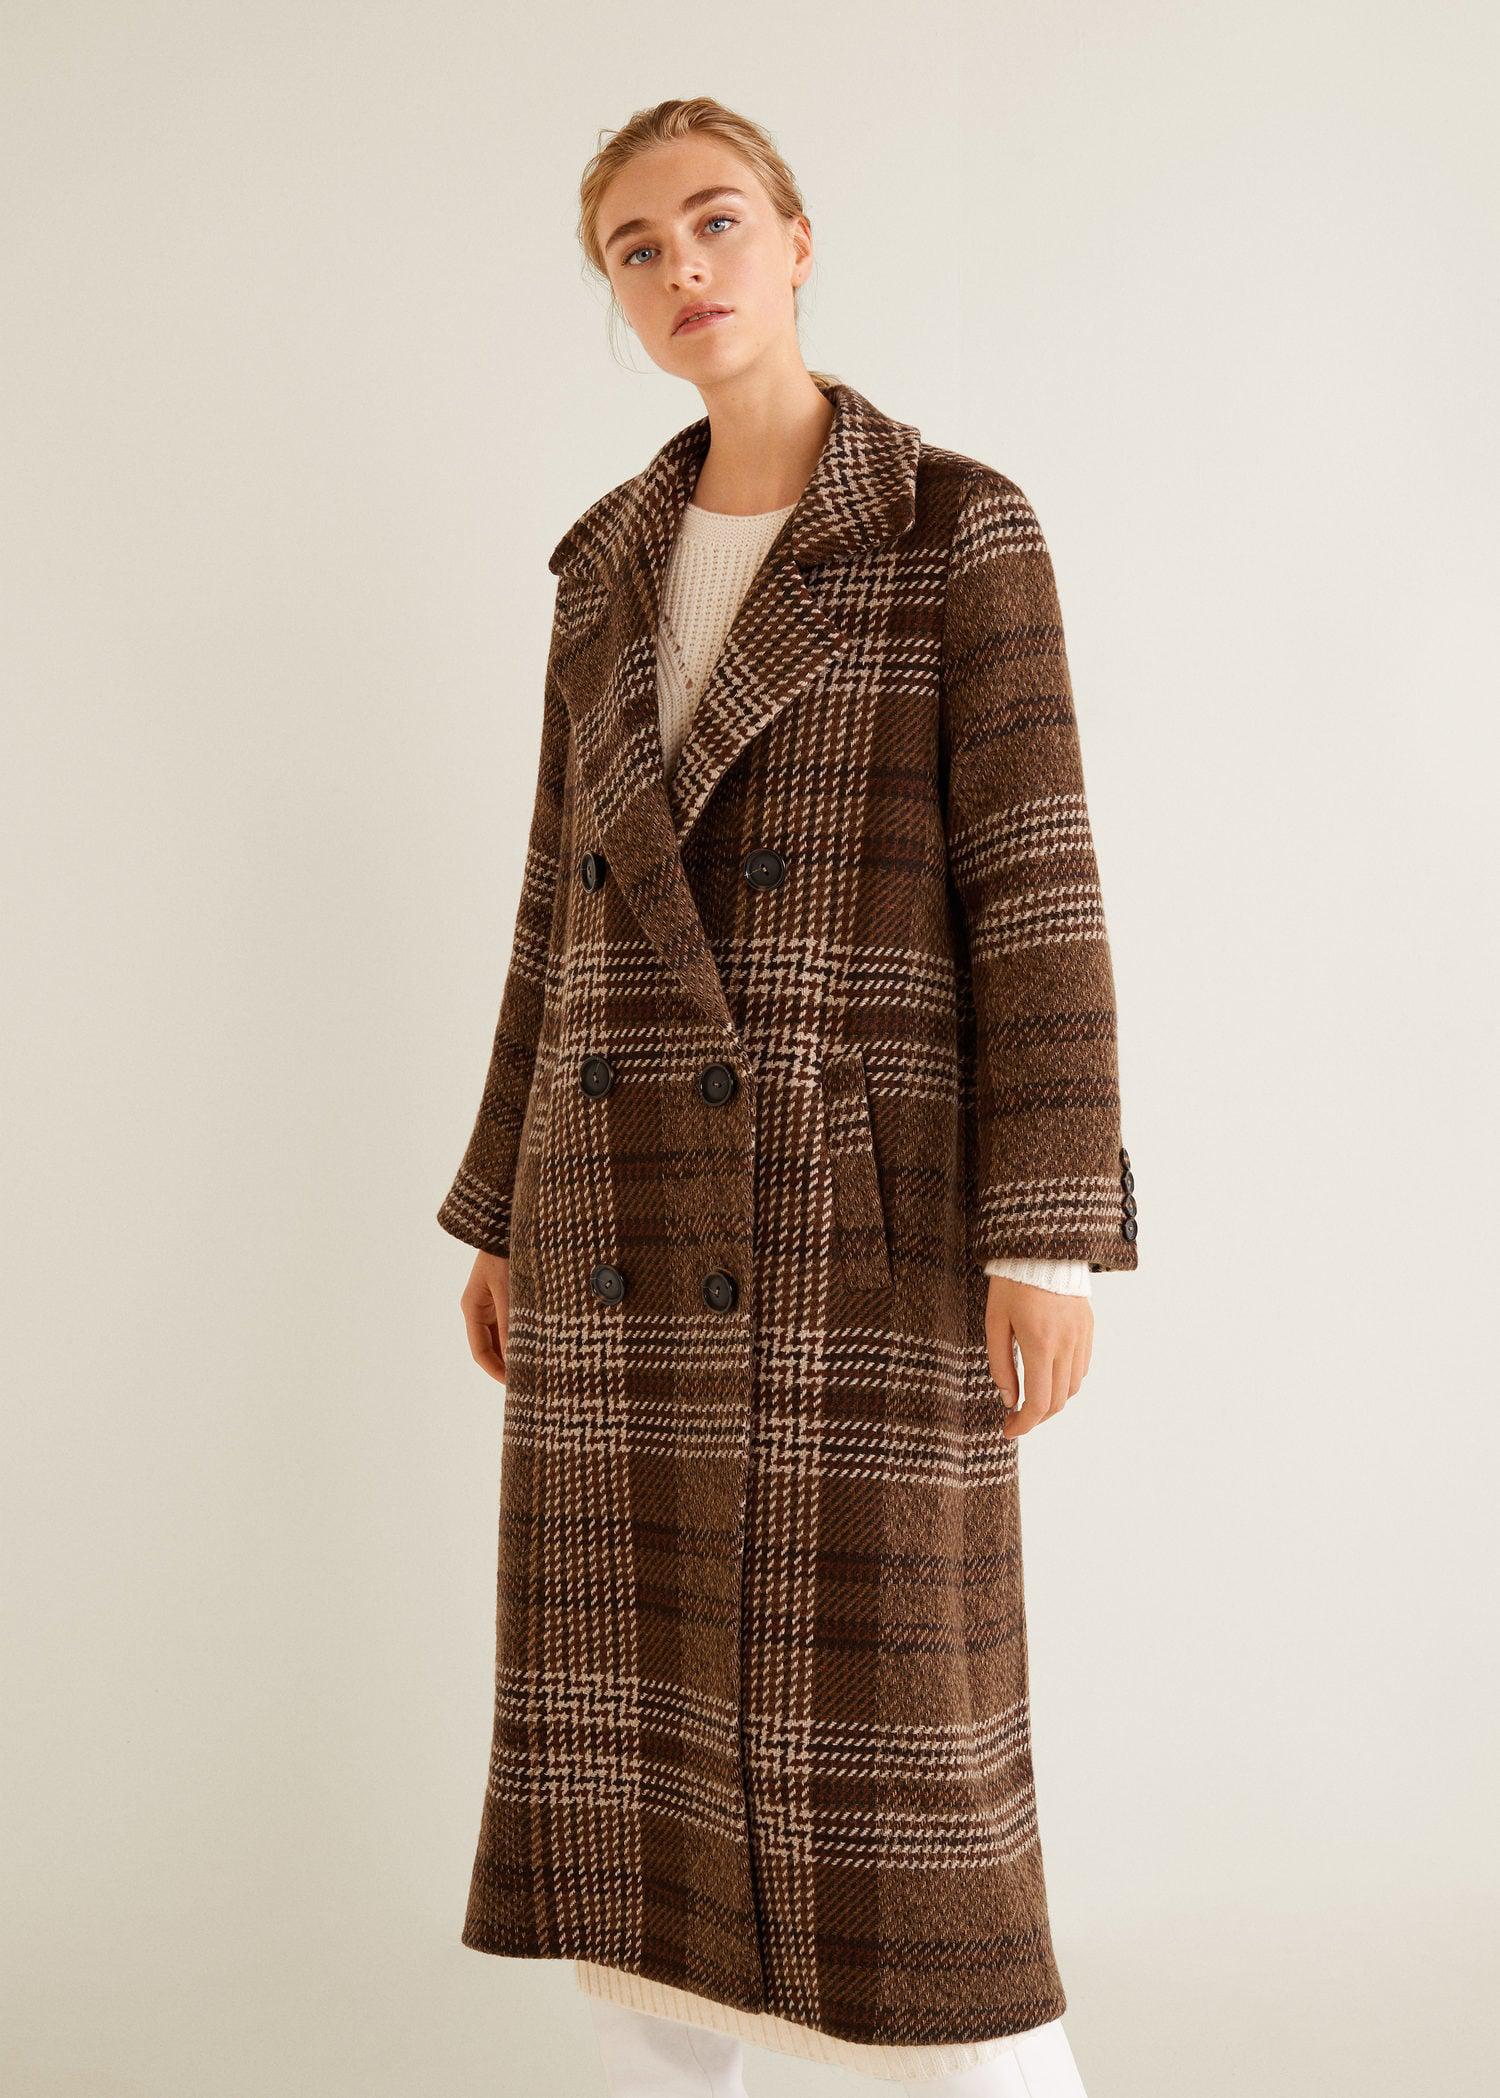 Mango Checked Recycled Wool Coat in Brown - Lyst